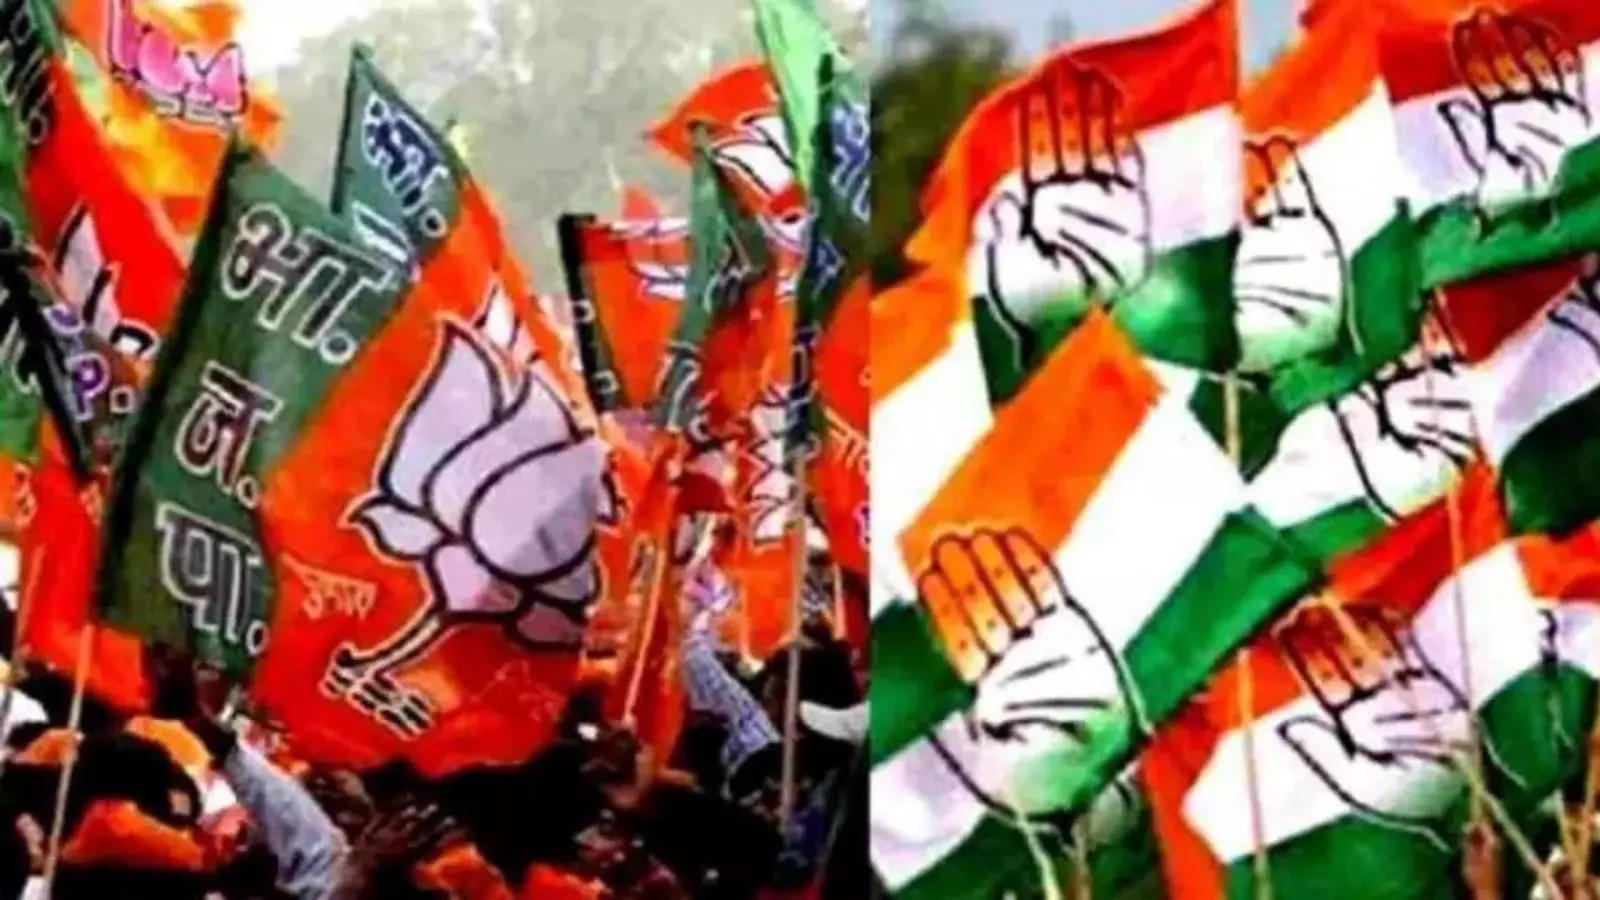 NDA, TMC, DMK, INIDA… What is the full name of these political parties? Know their 'full form' before forming a government